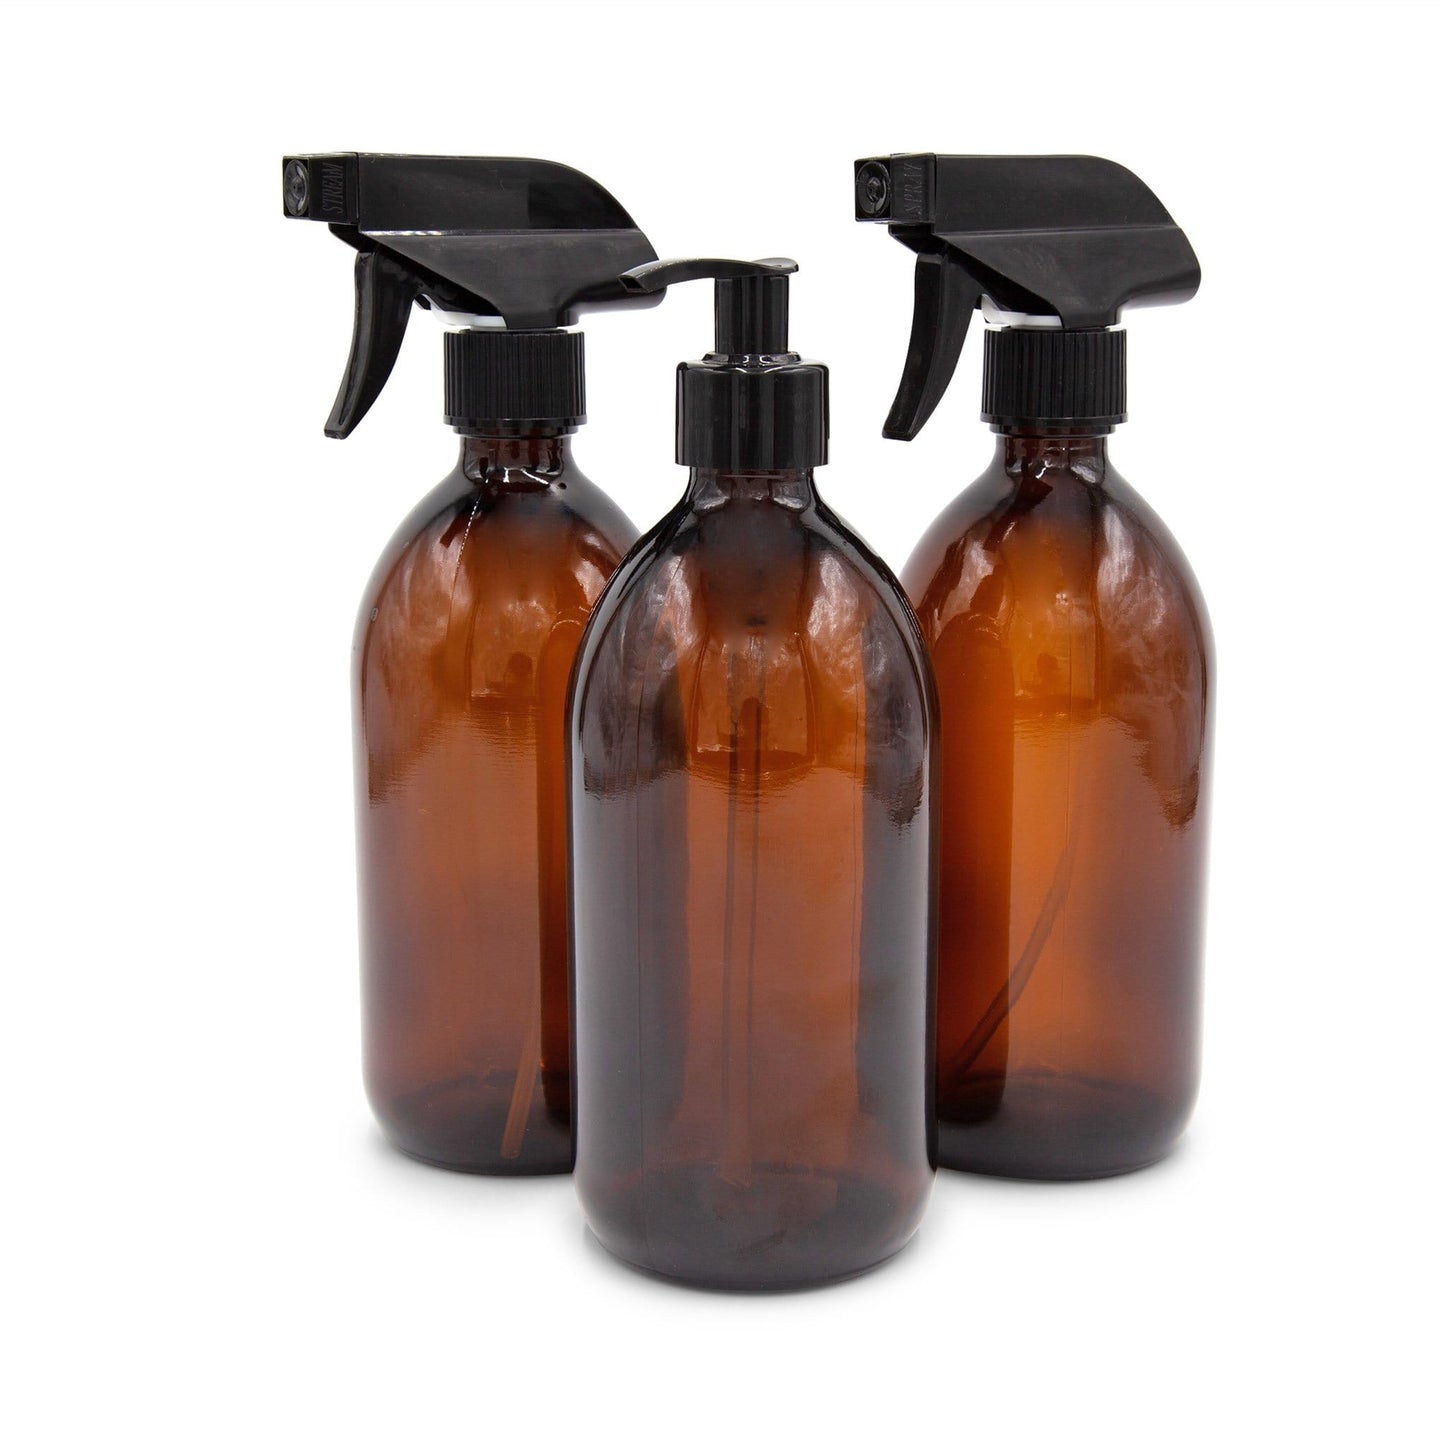 Faerly Bottles 3 Bottle Starter Pack - 2 x Spray, 1 x Pump 500ml Amber Glass Sirop Bottle - with Trigger Spray or Lotion Pump